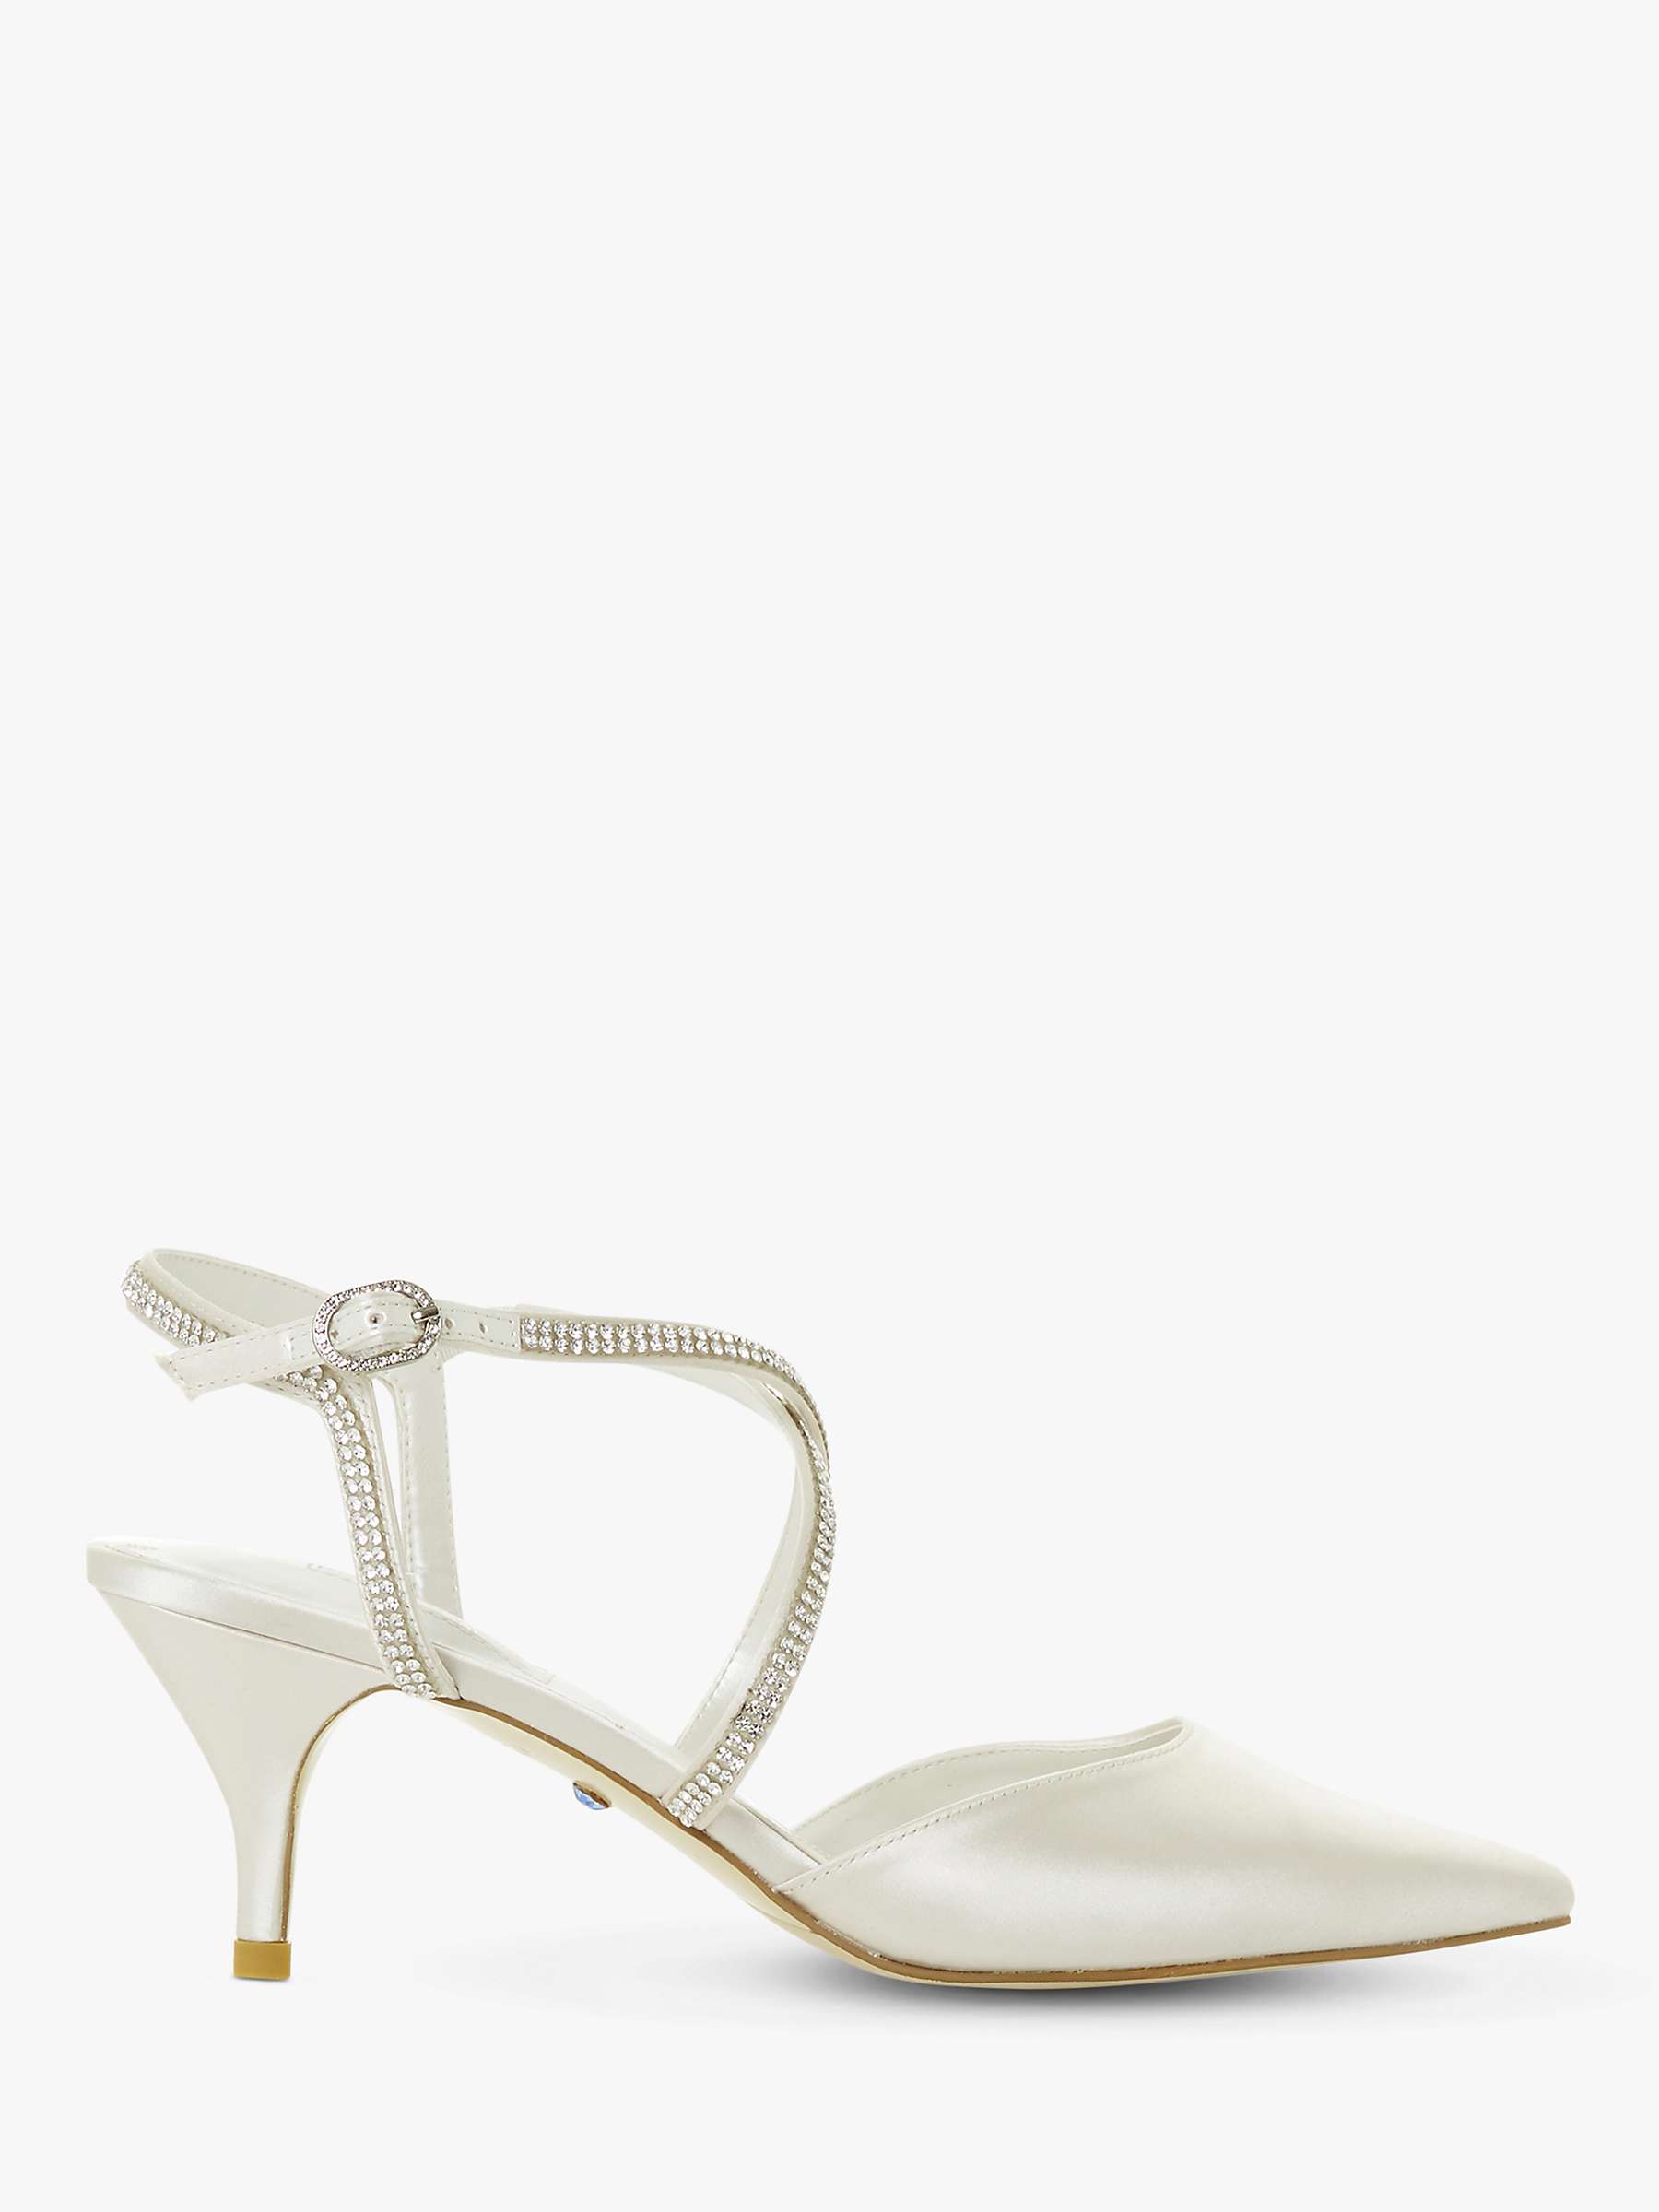 Buy Dune Debut Diamante Cross Strap Court Shoes, Ivory Online at johnlewis.com